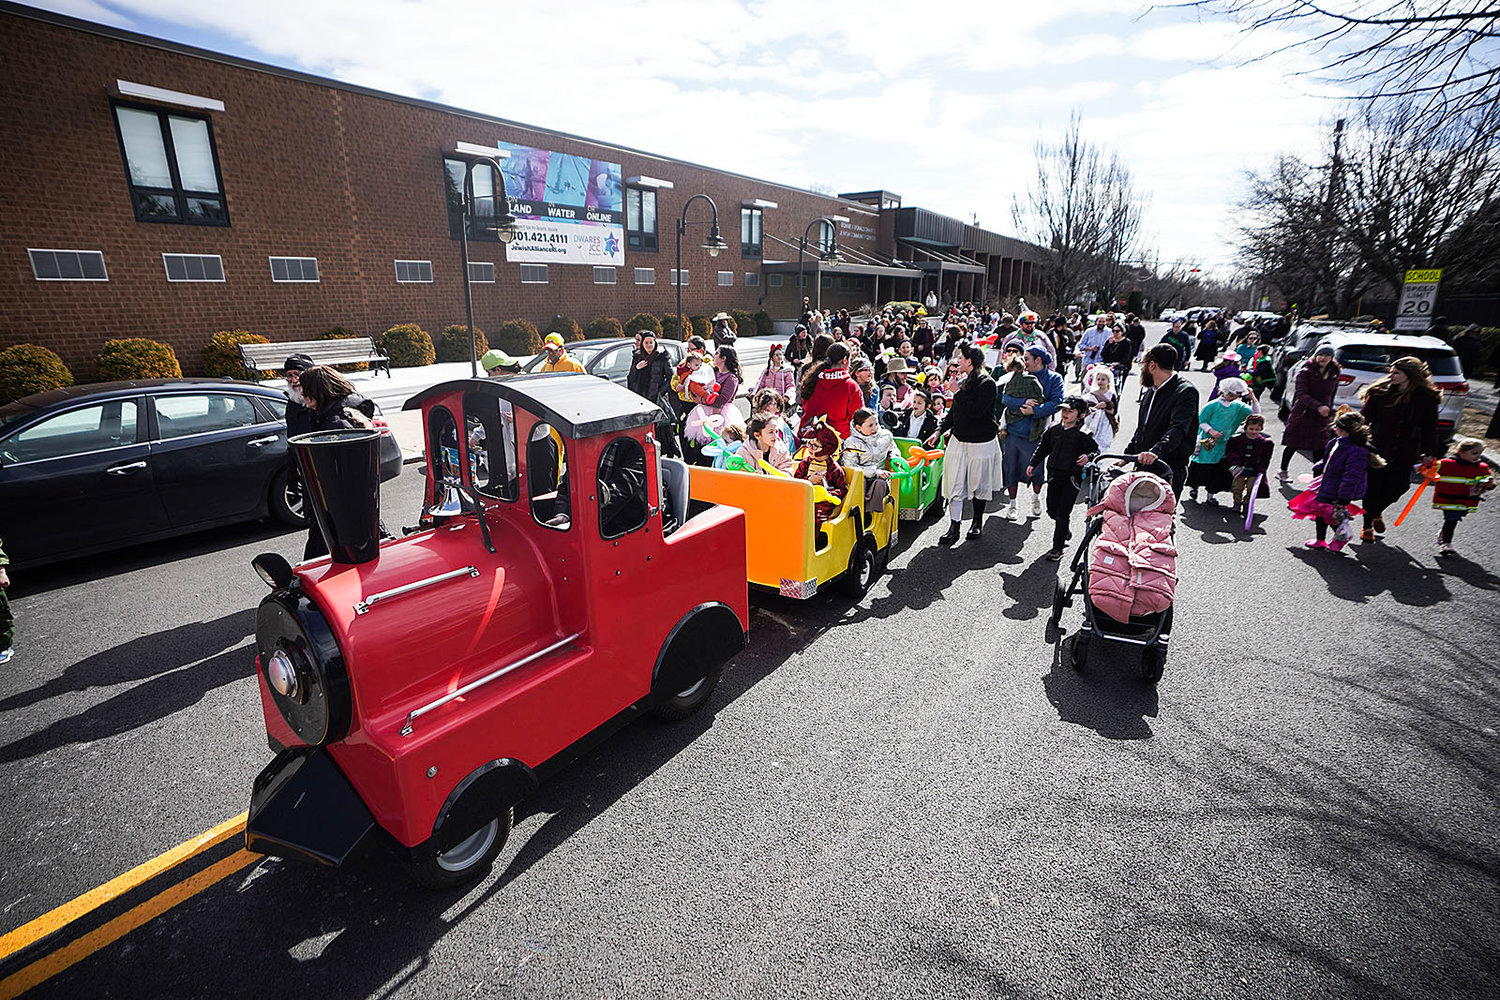 Kids get a ride as the parade ends in front of the Dwares Jewish Community Center.